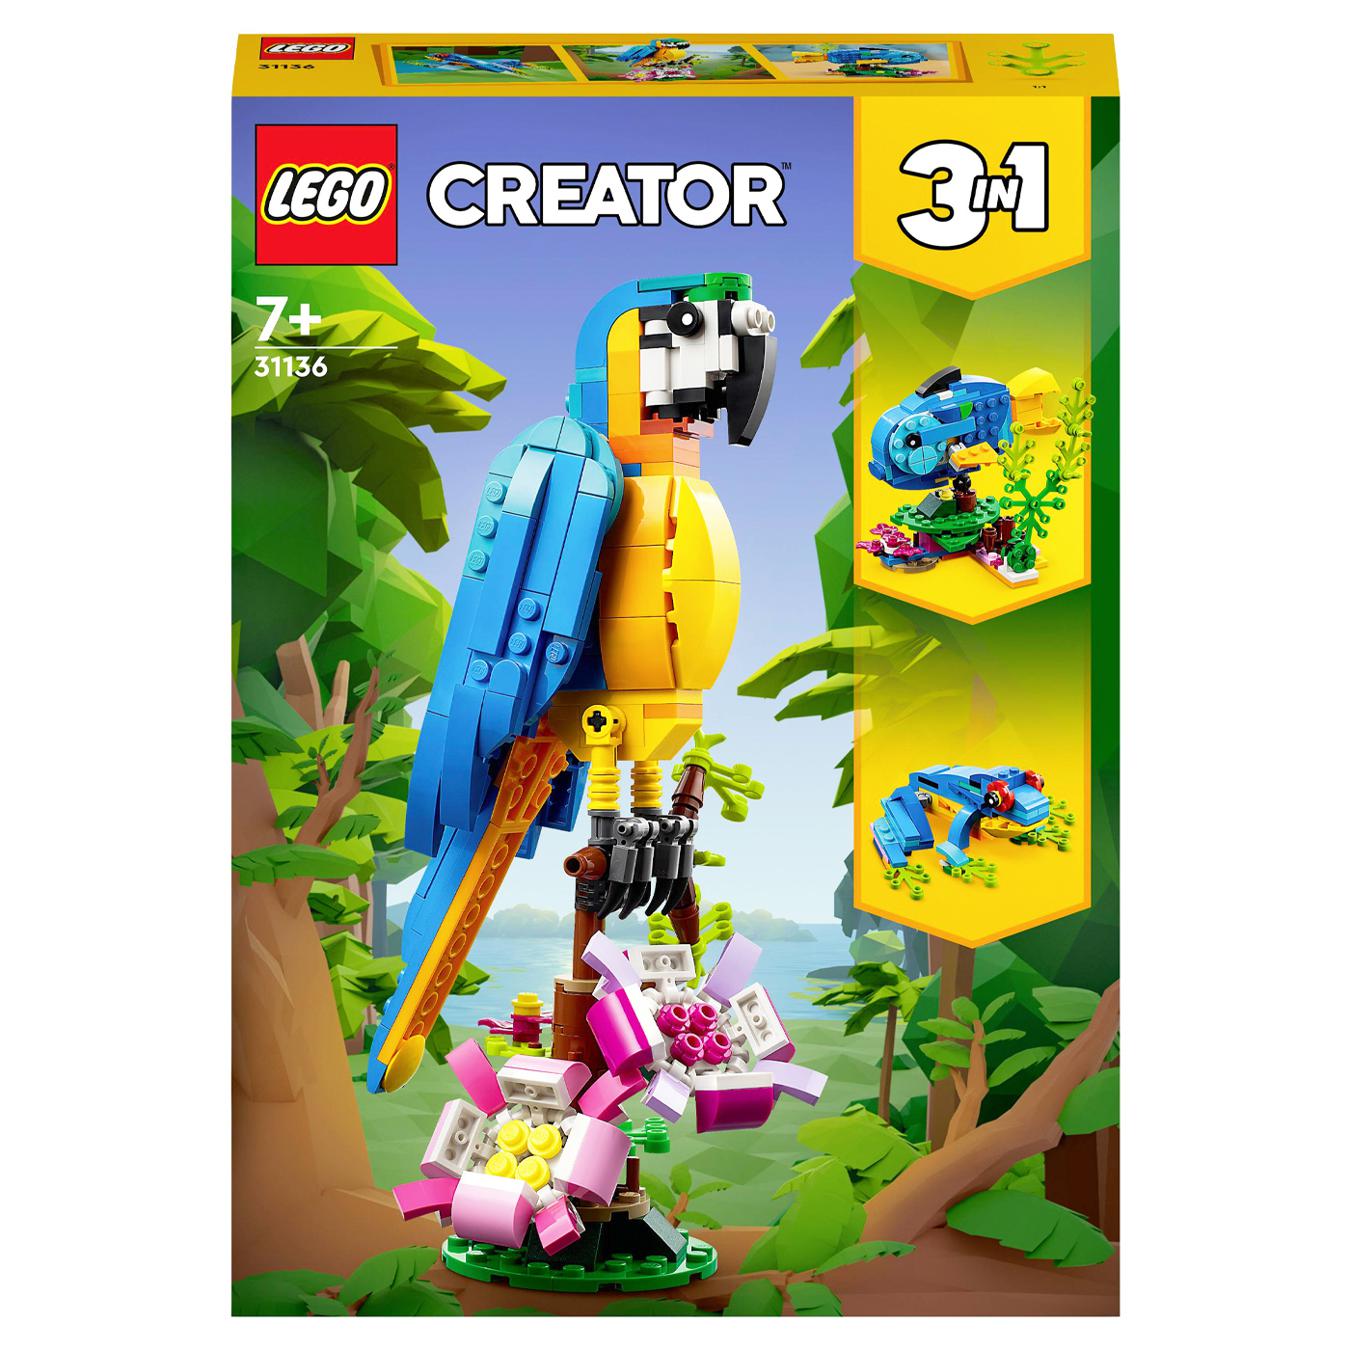 Constructor LEGO Exotic parrot